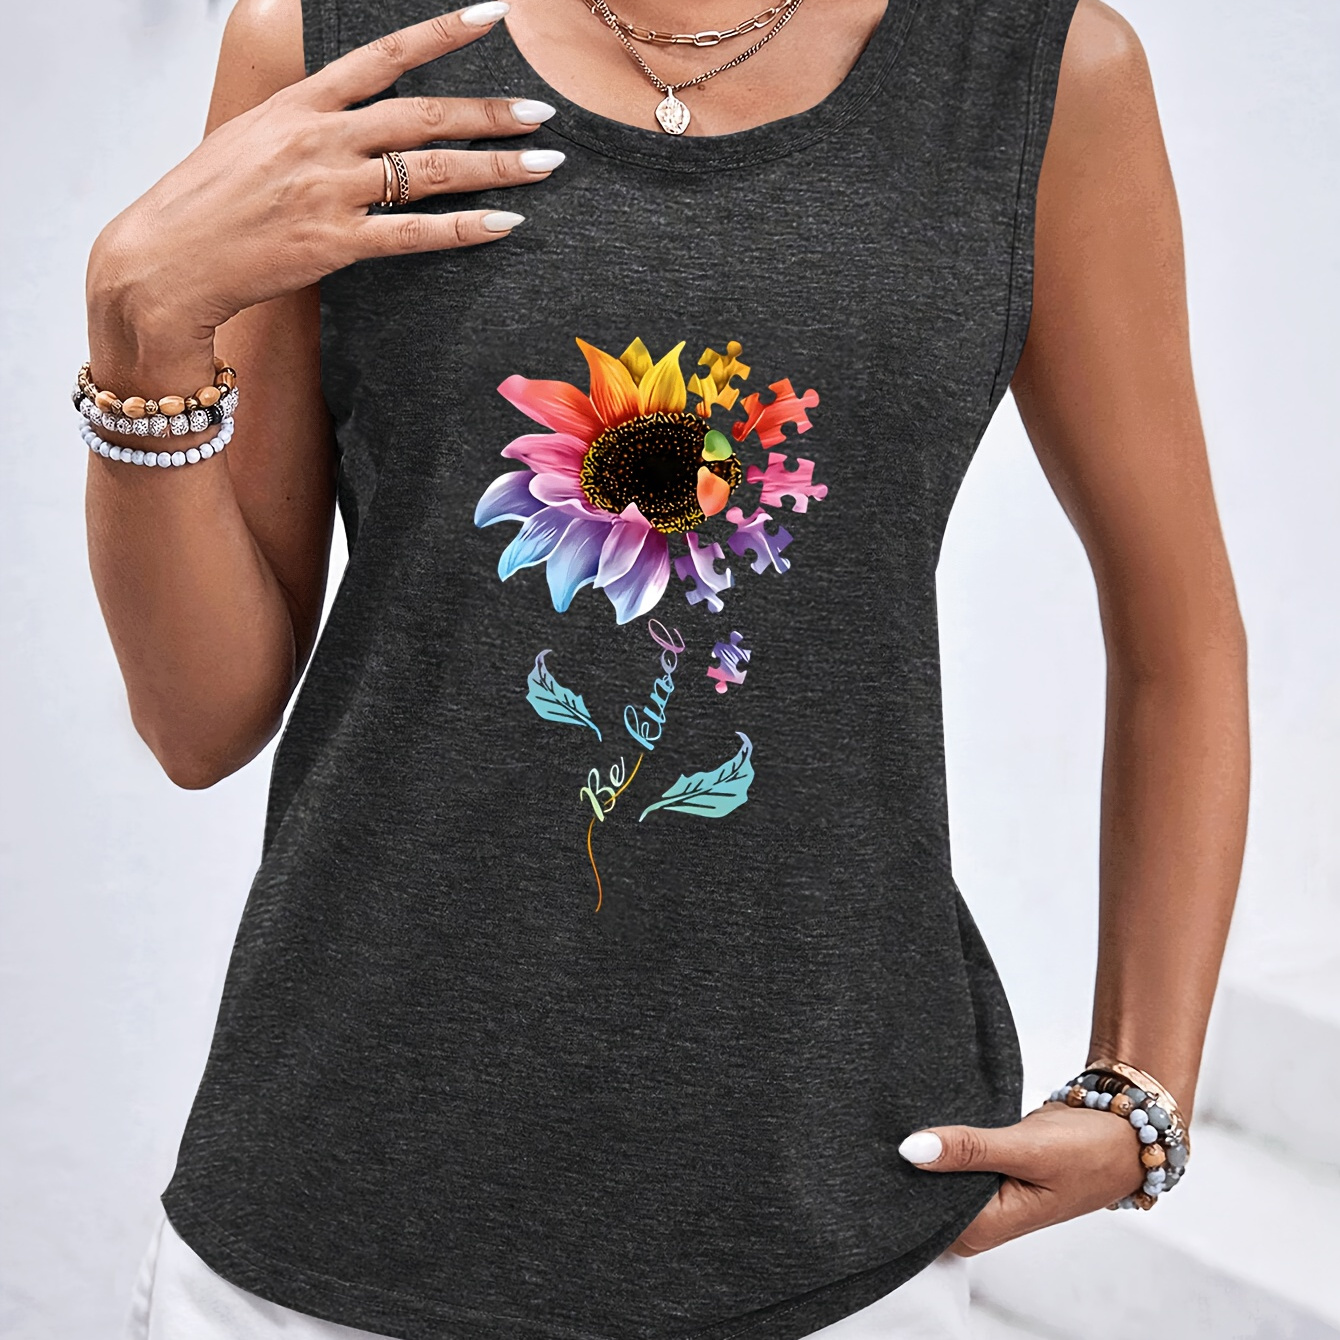 

Sunflower Print Crew Neck Tank Top, Casual Sleeveless Top For Summer & Spring, Women's Clothing